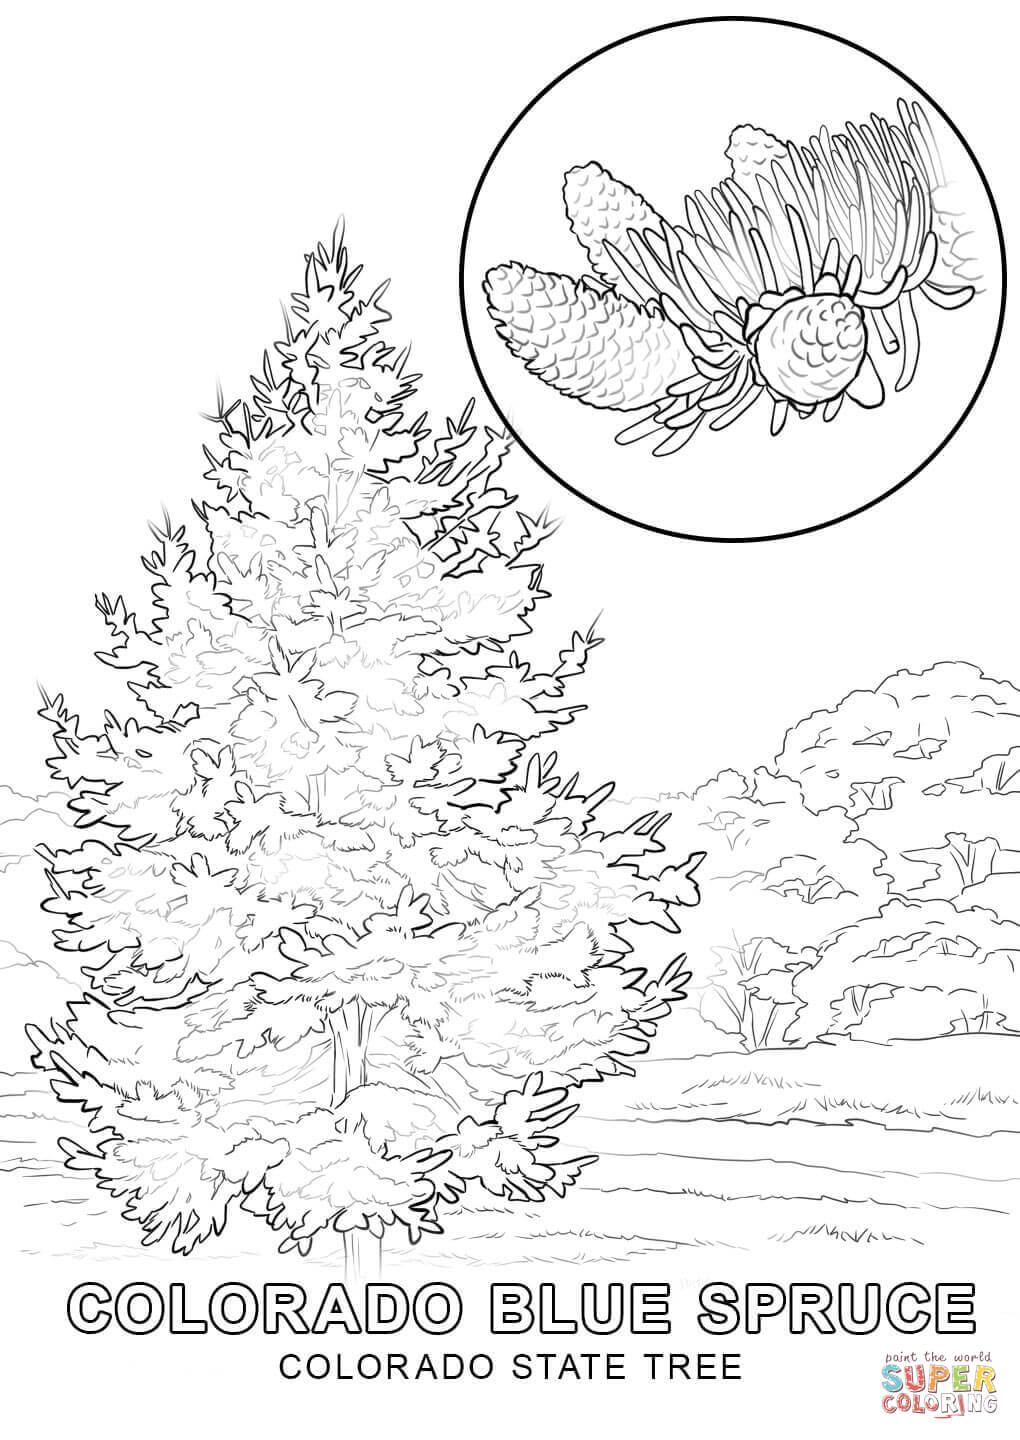 Colorado State Bird And Flower Coloring Page - Coloring Pages For ...